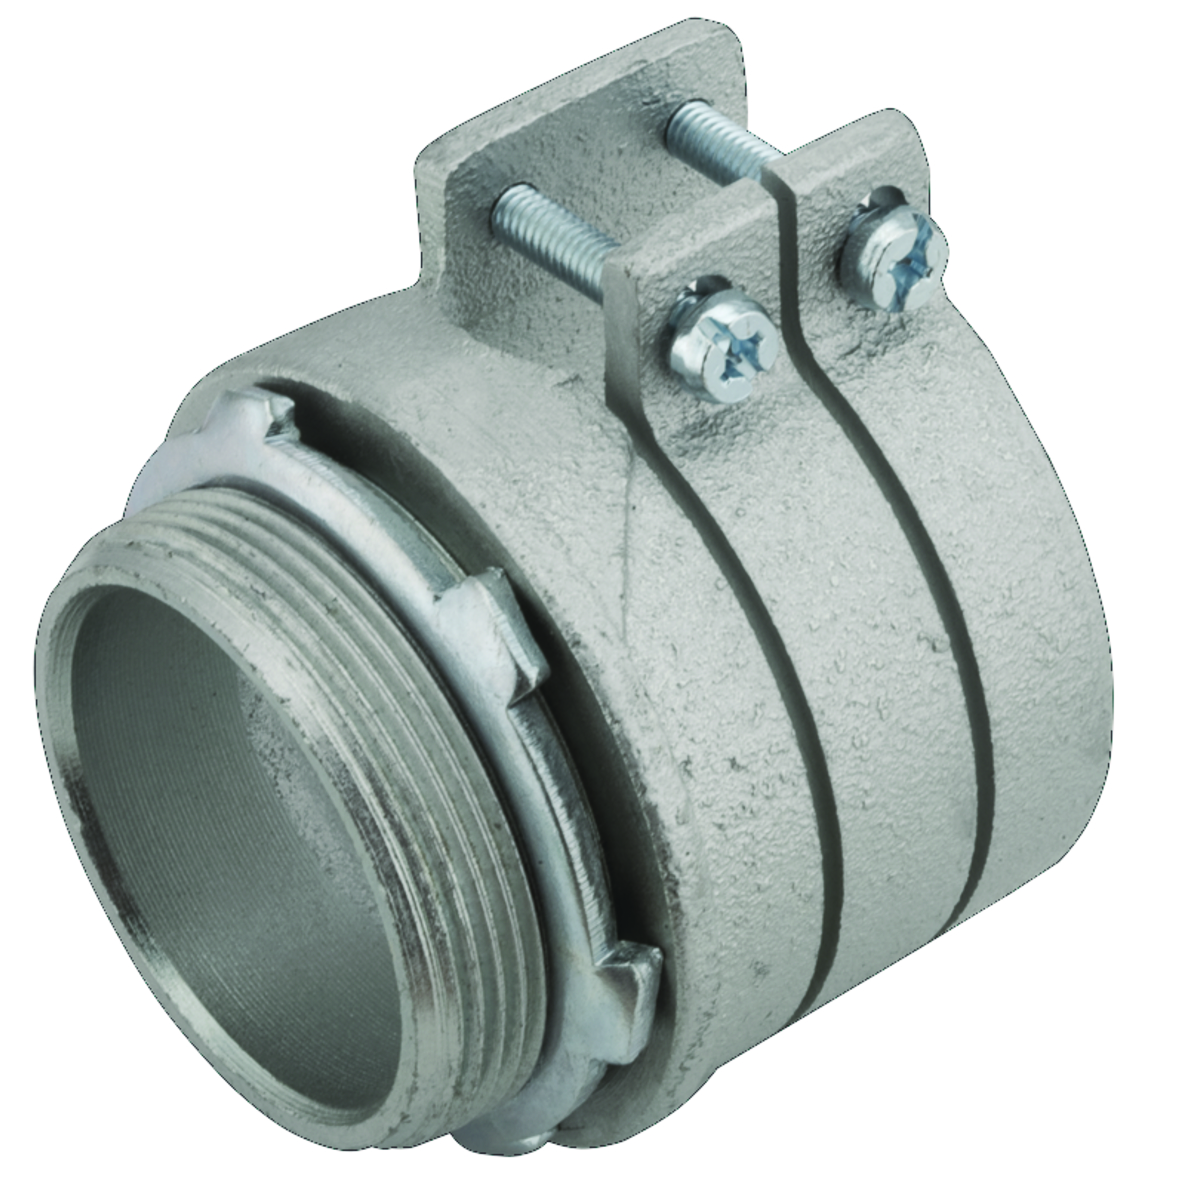 RACO 2114 3-1/2" STRAIGHT SQUEEZE CONNECTOR